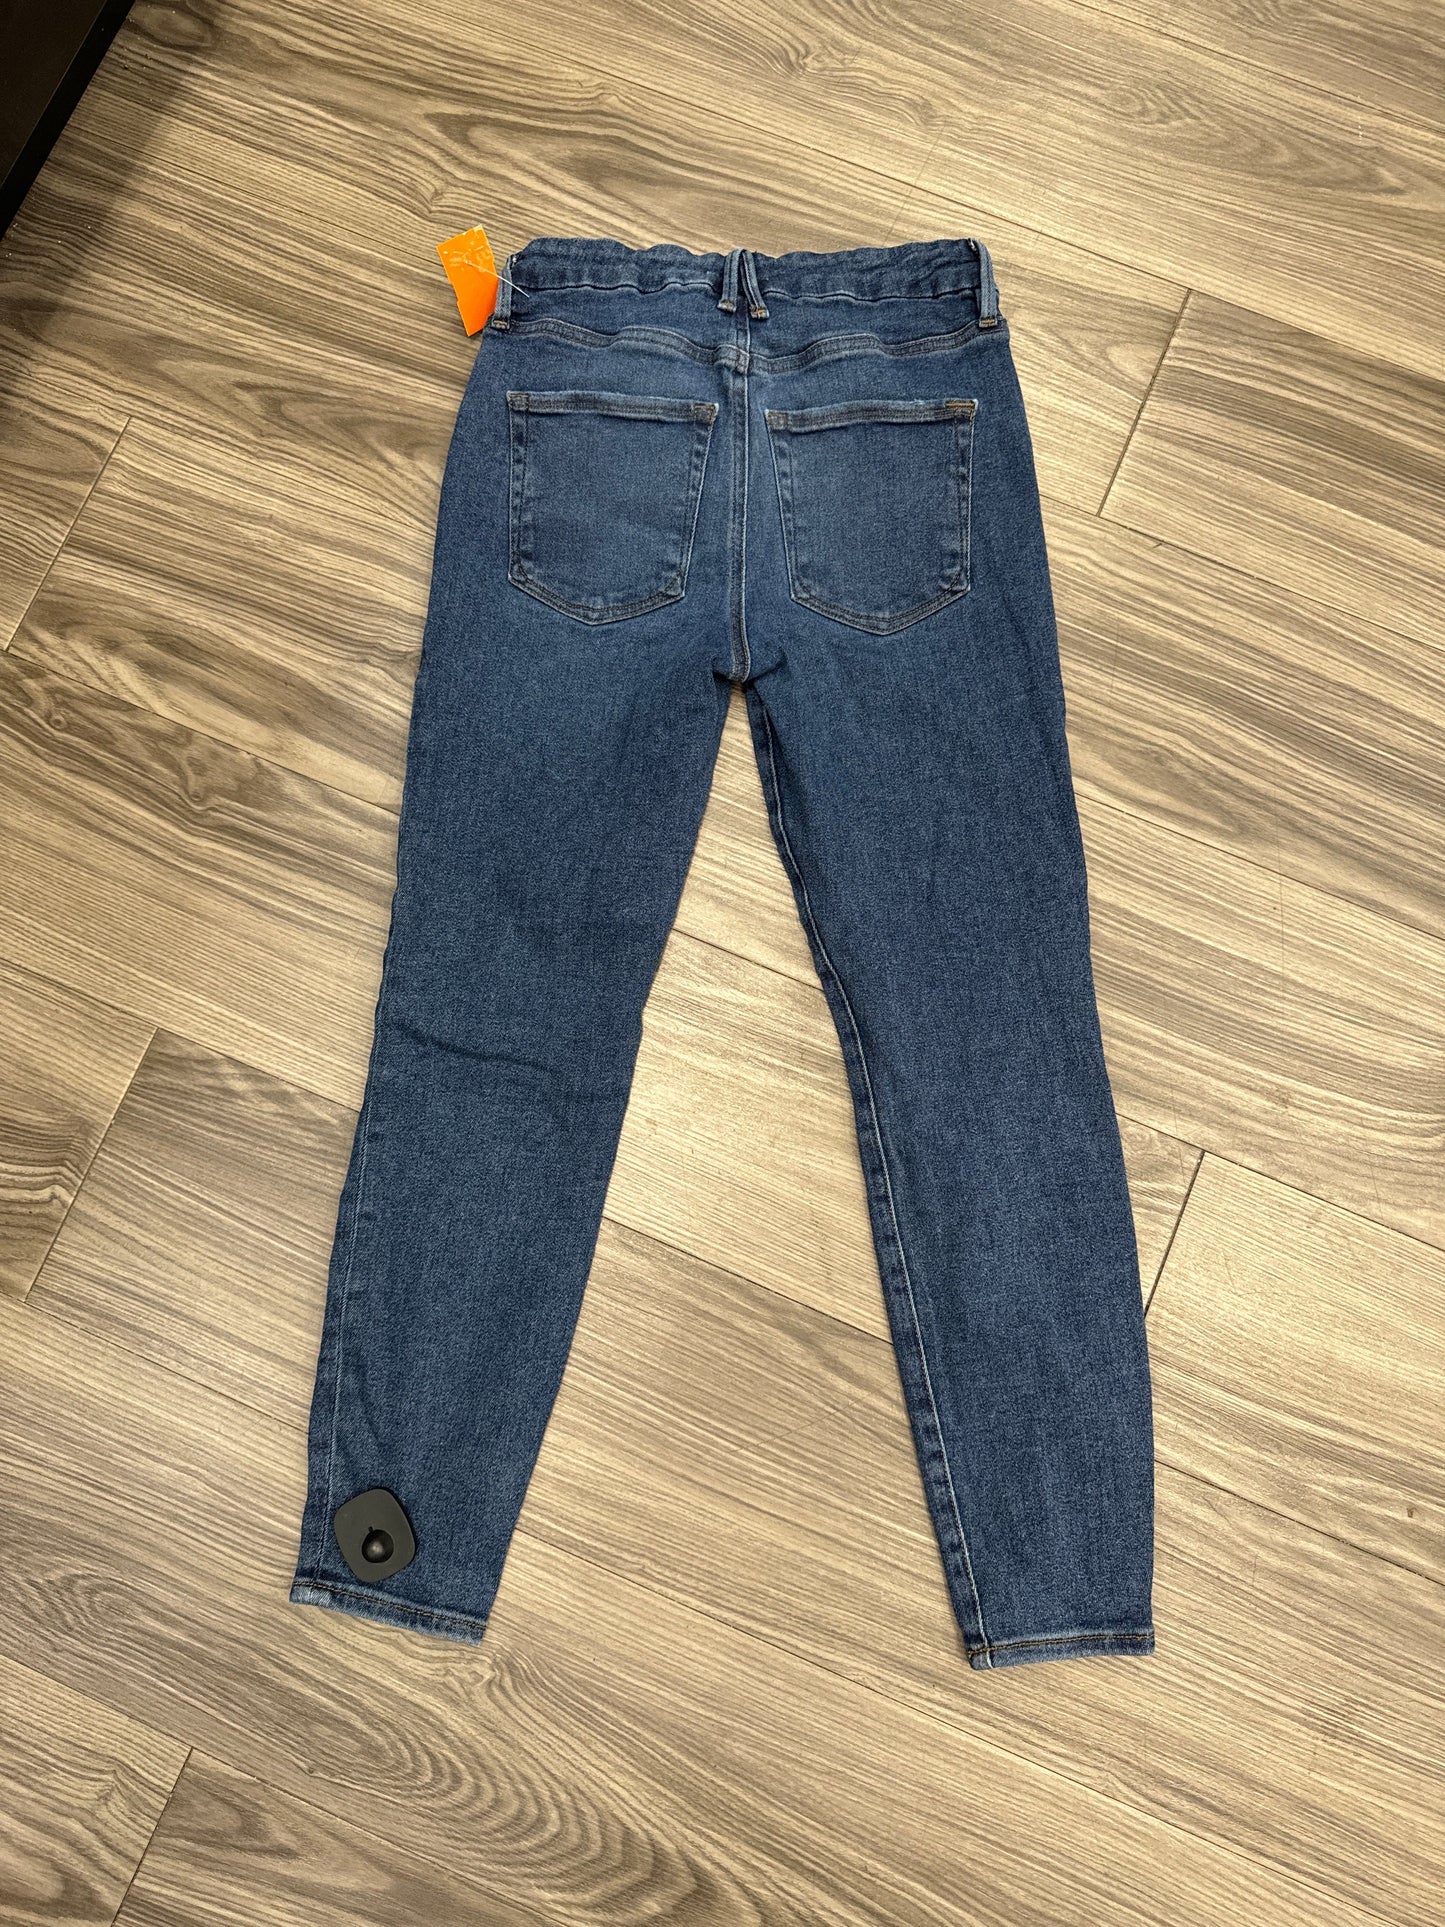 Jeans Skinny By Good American  Size: 6